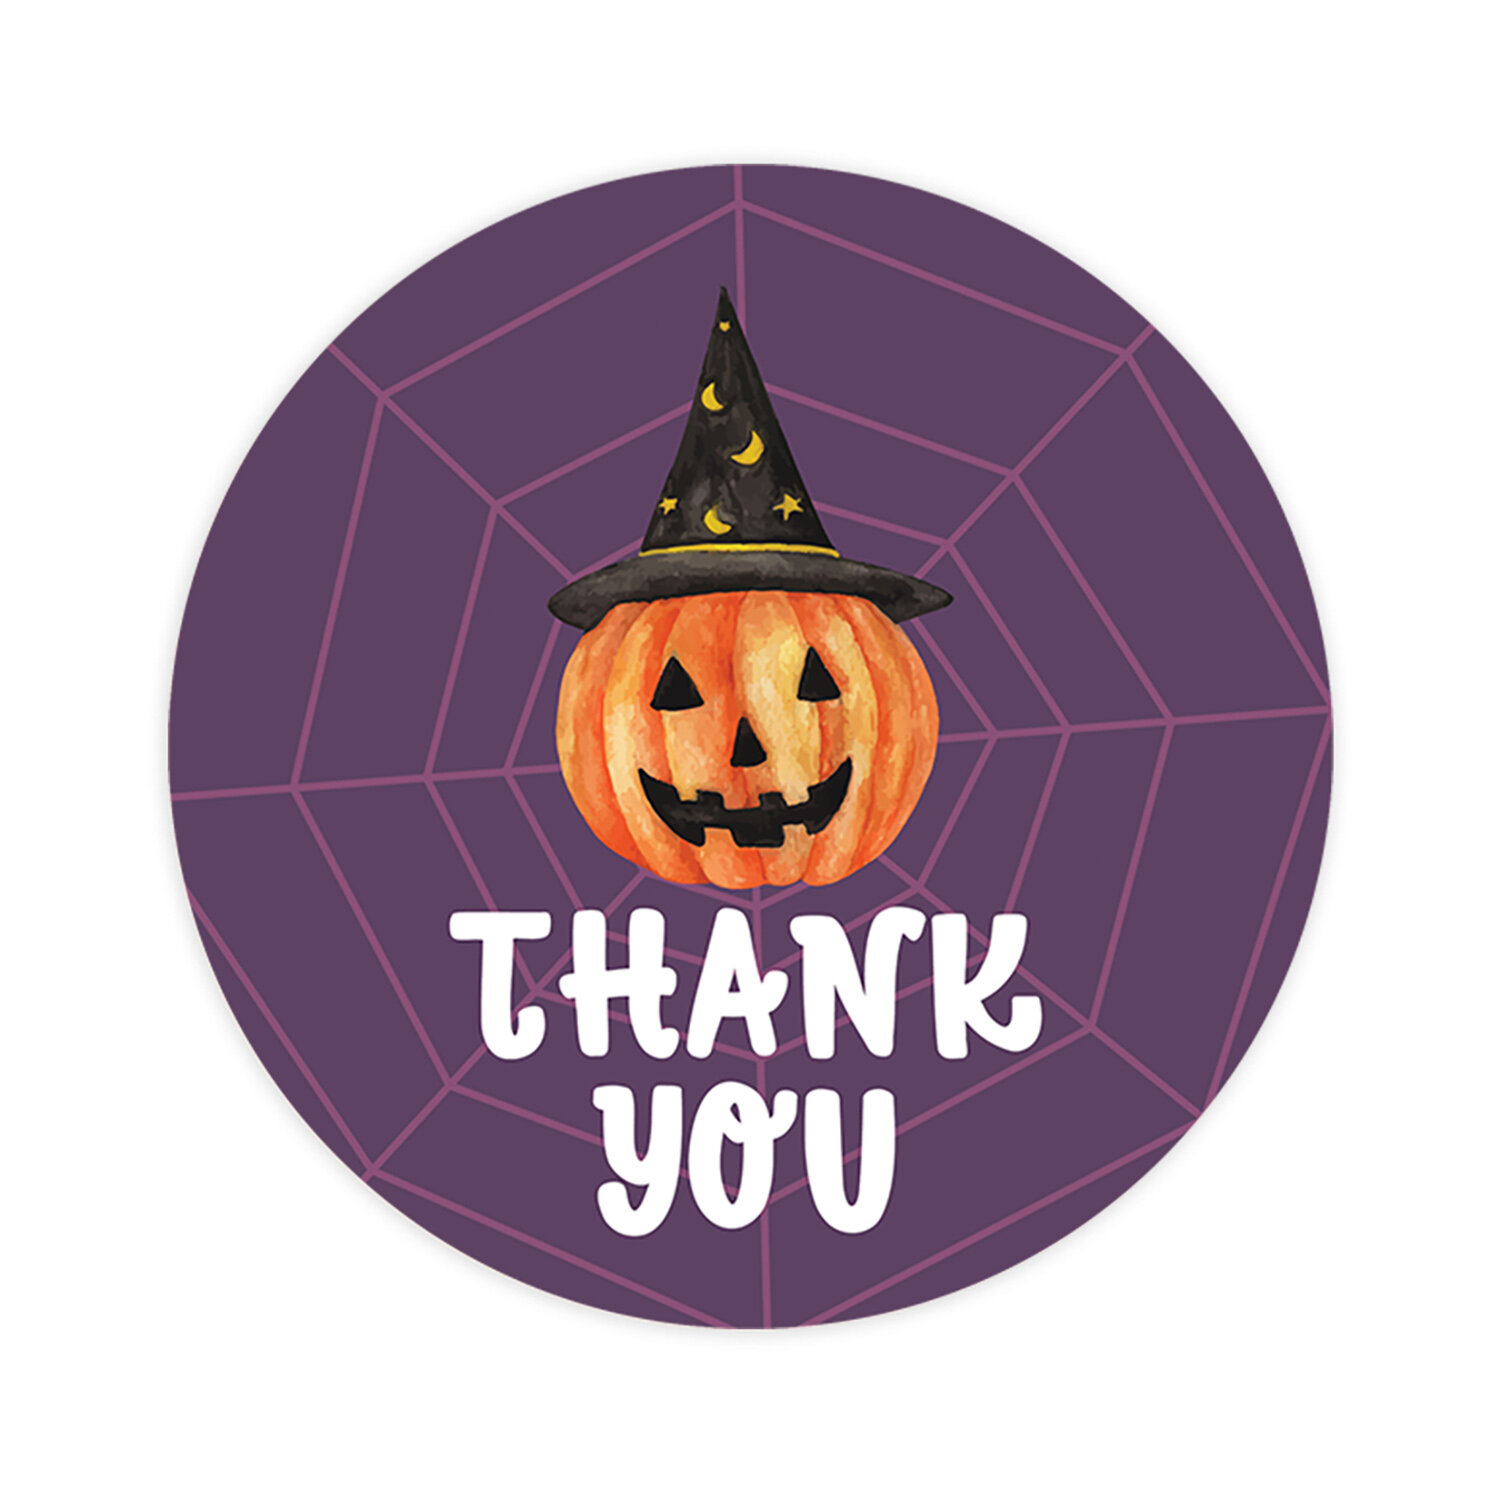 Witchy stickers for Halloween! : r/artstore